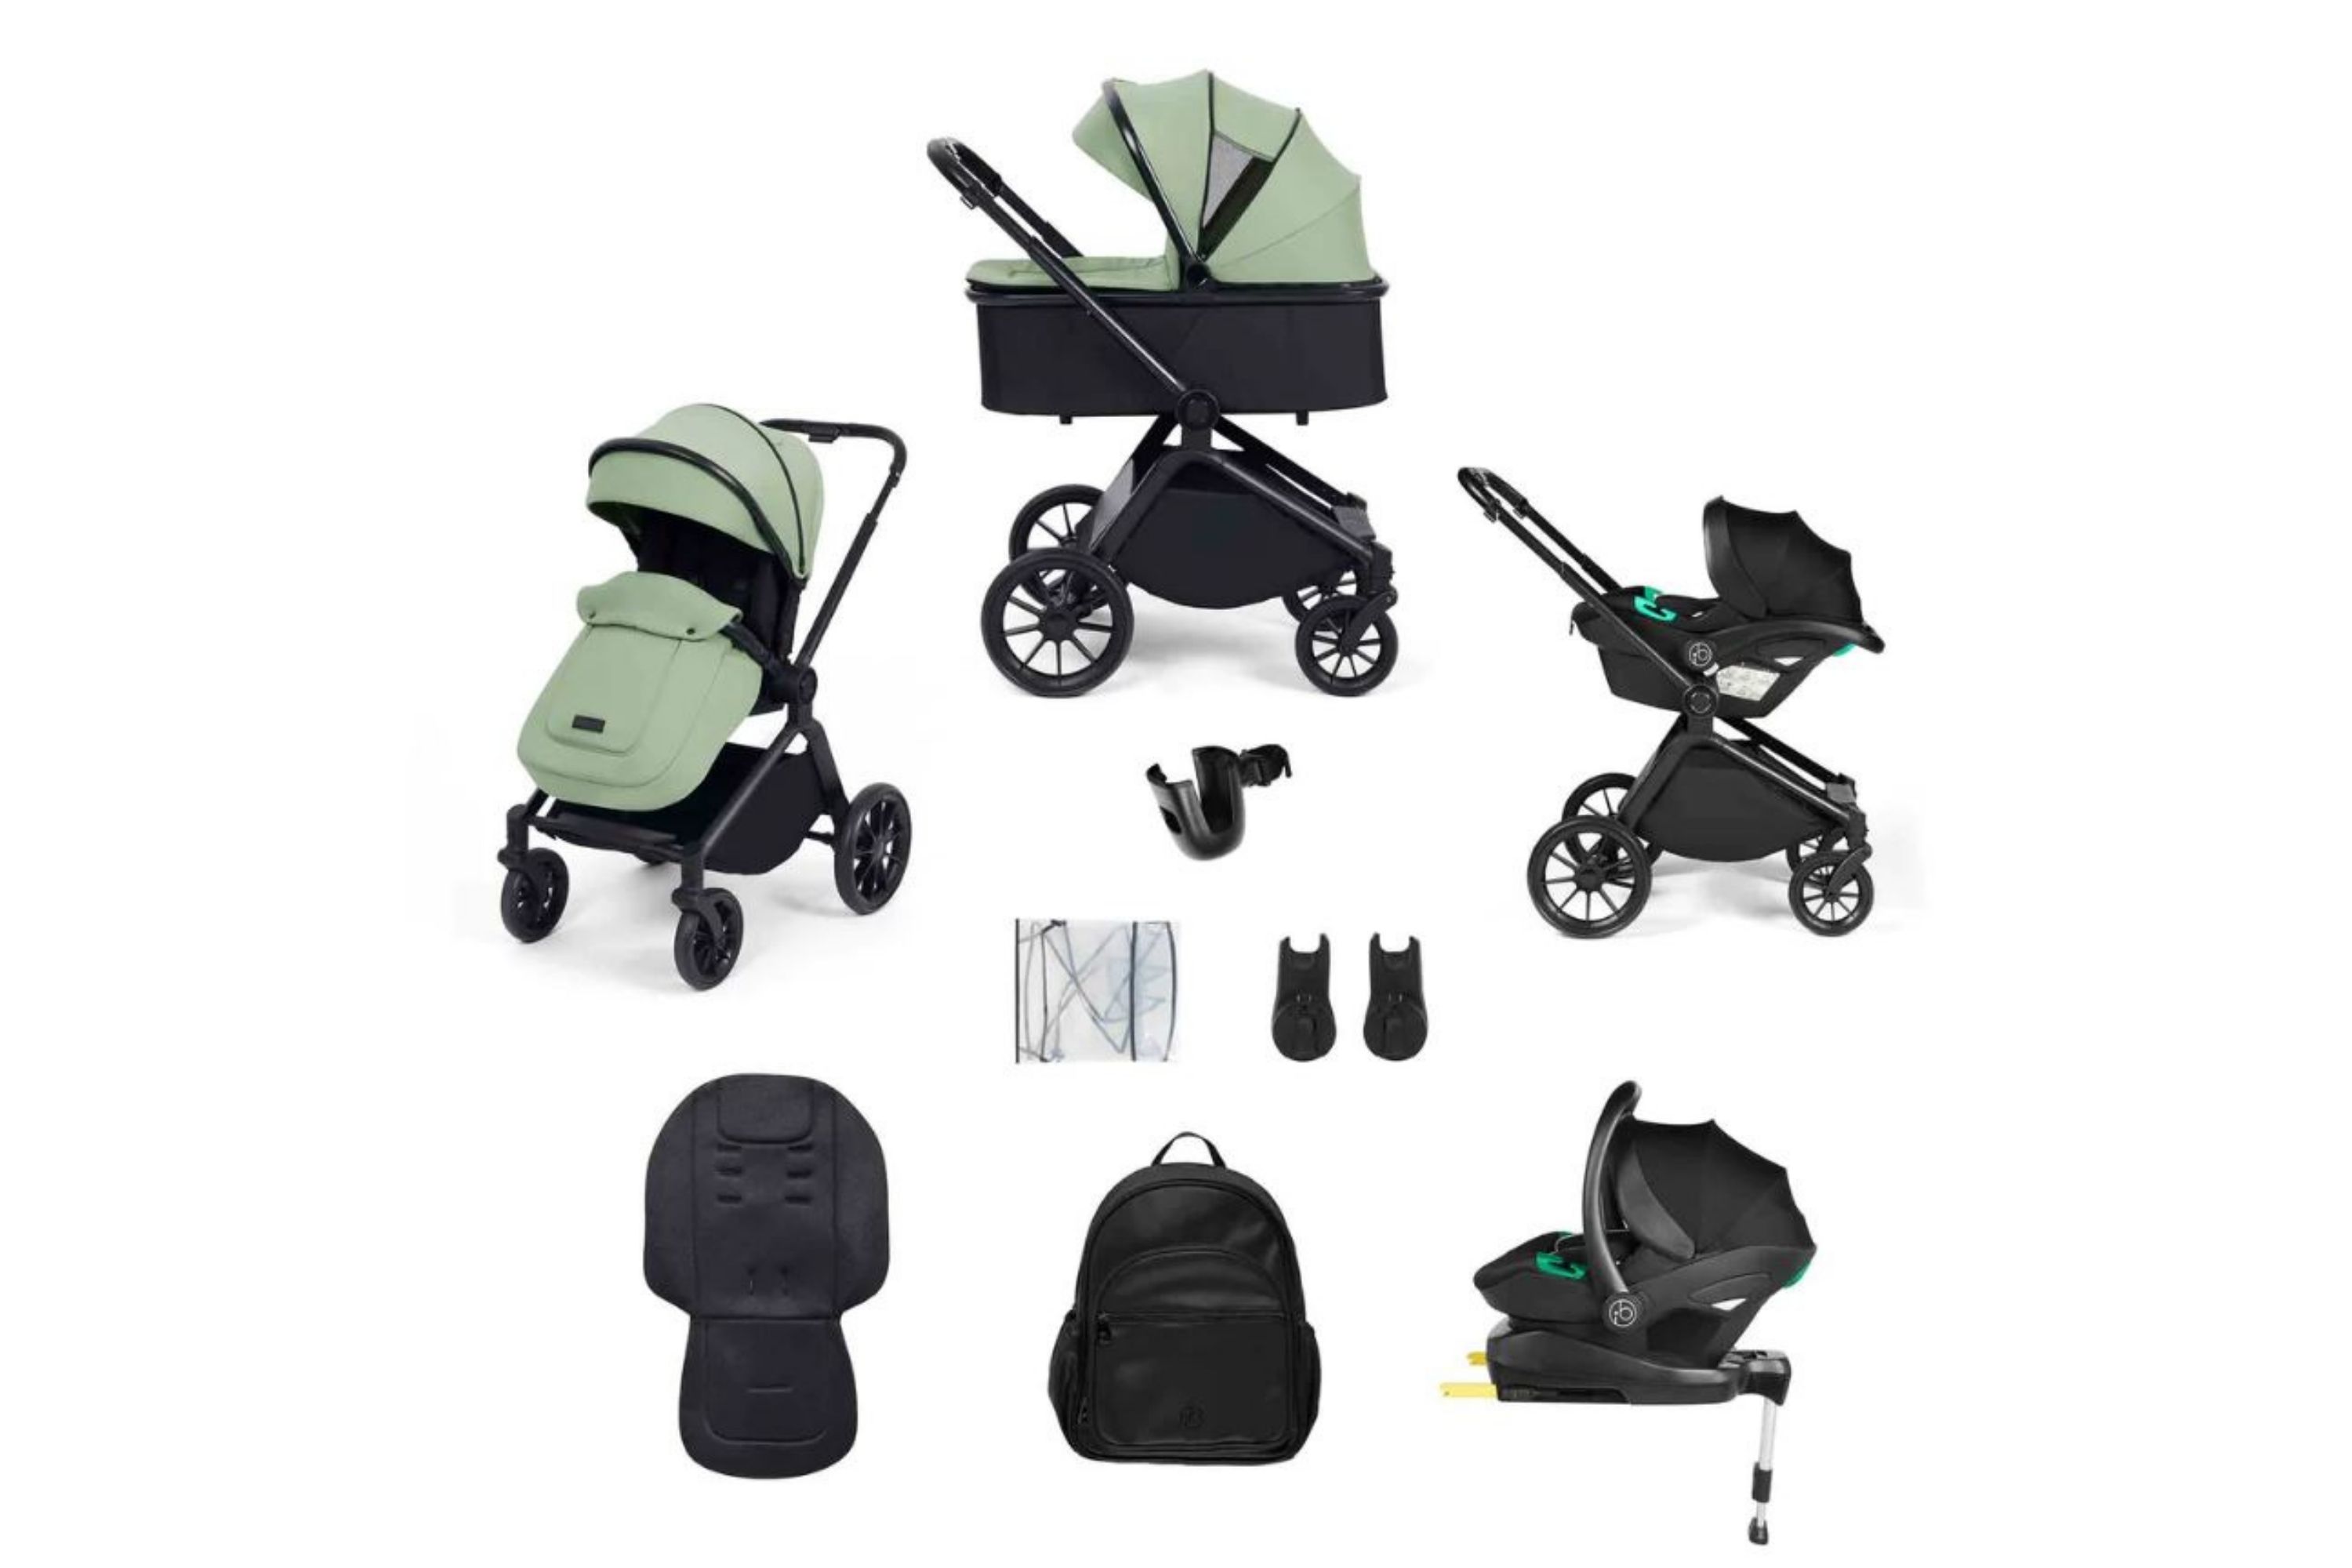 The Ickle Bubba Altima travel system. pictured with all the component parts included in the bundle